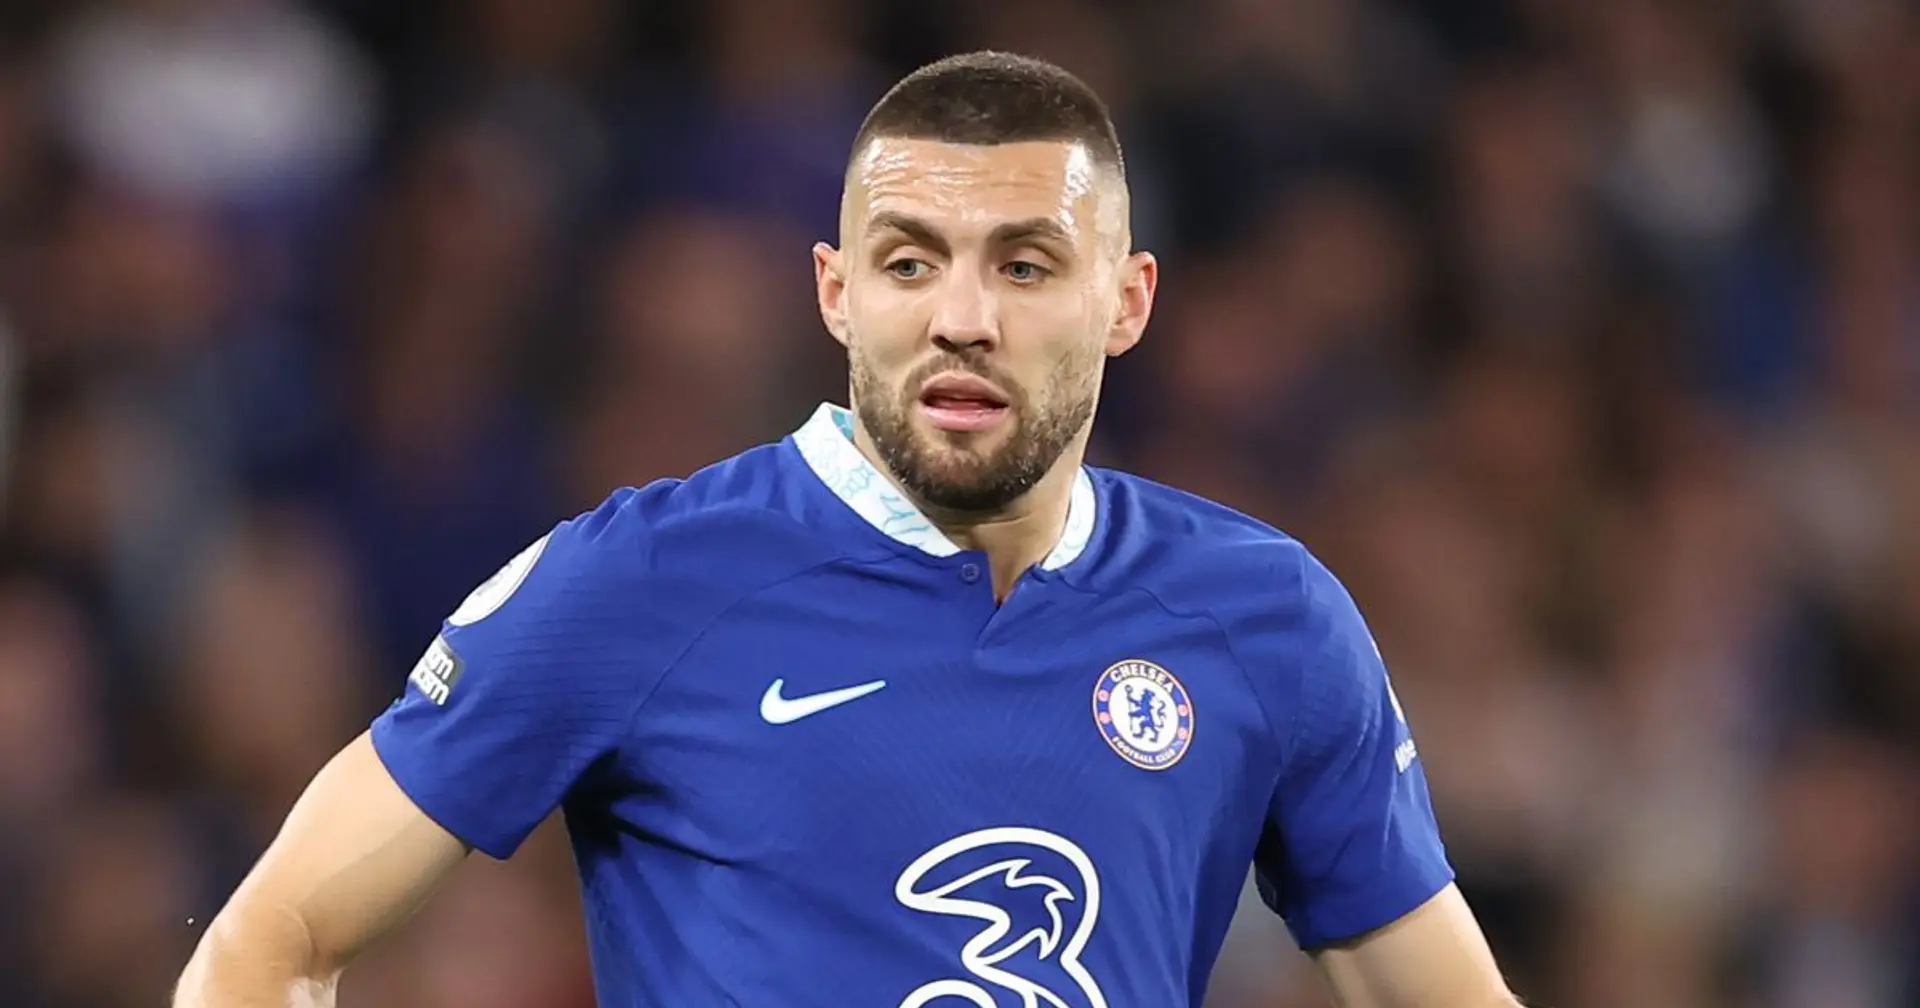 Potter shares Kovacic return date after Liverpool injury absence